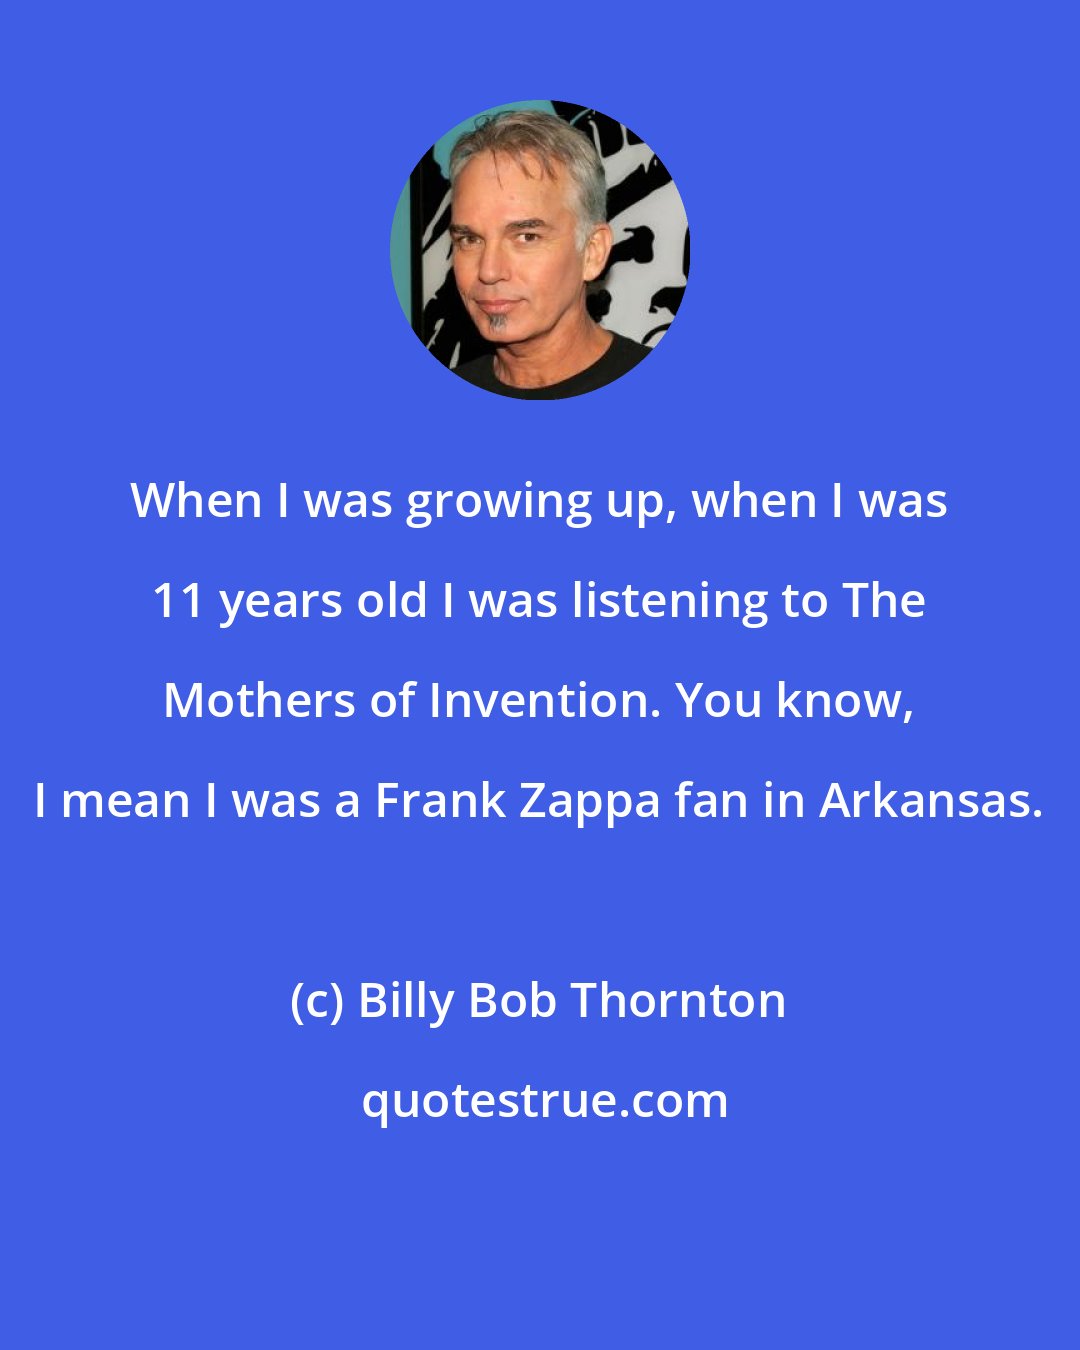 Billy Bob Thornton: When I was growing up, when I was 11 years old I was listening to The Mothers of Invention. You know, I mean I was a Frank Zappa fan in Arkansas.